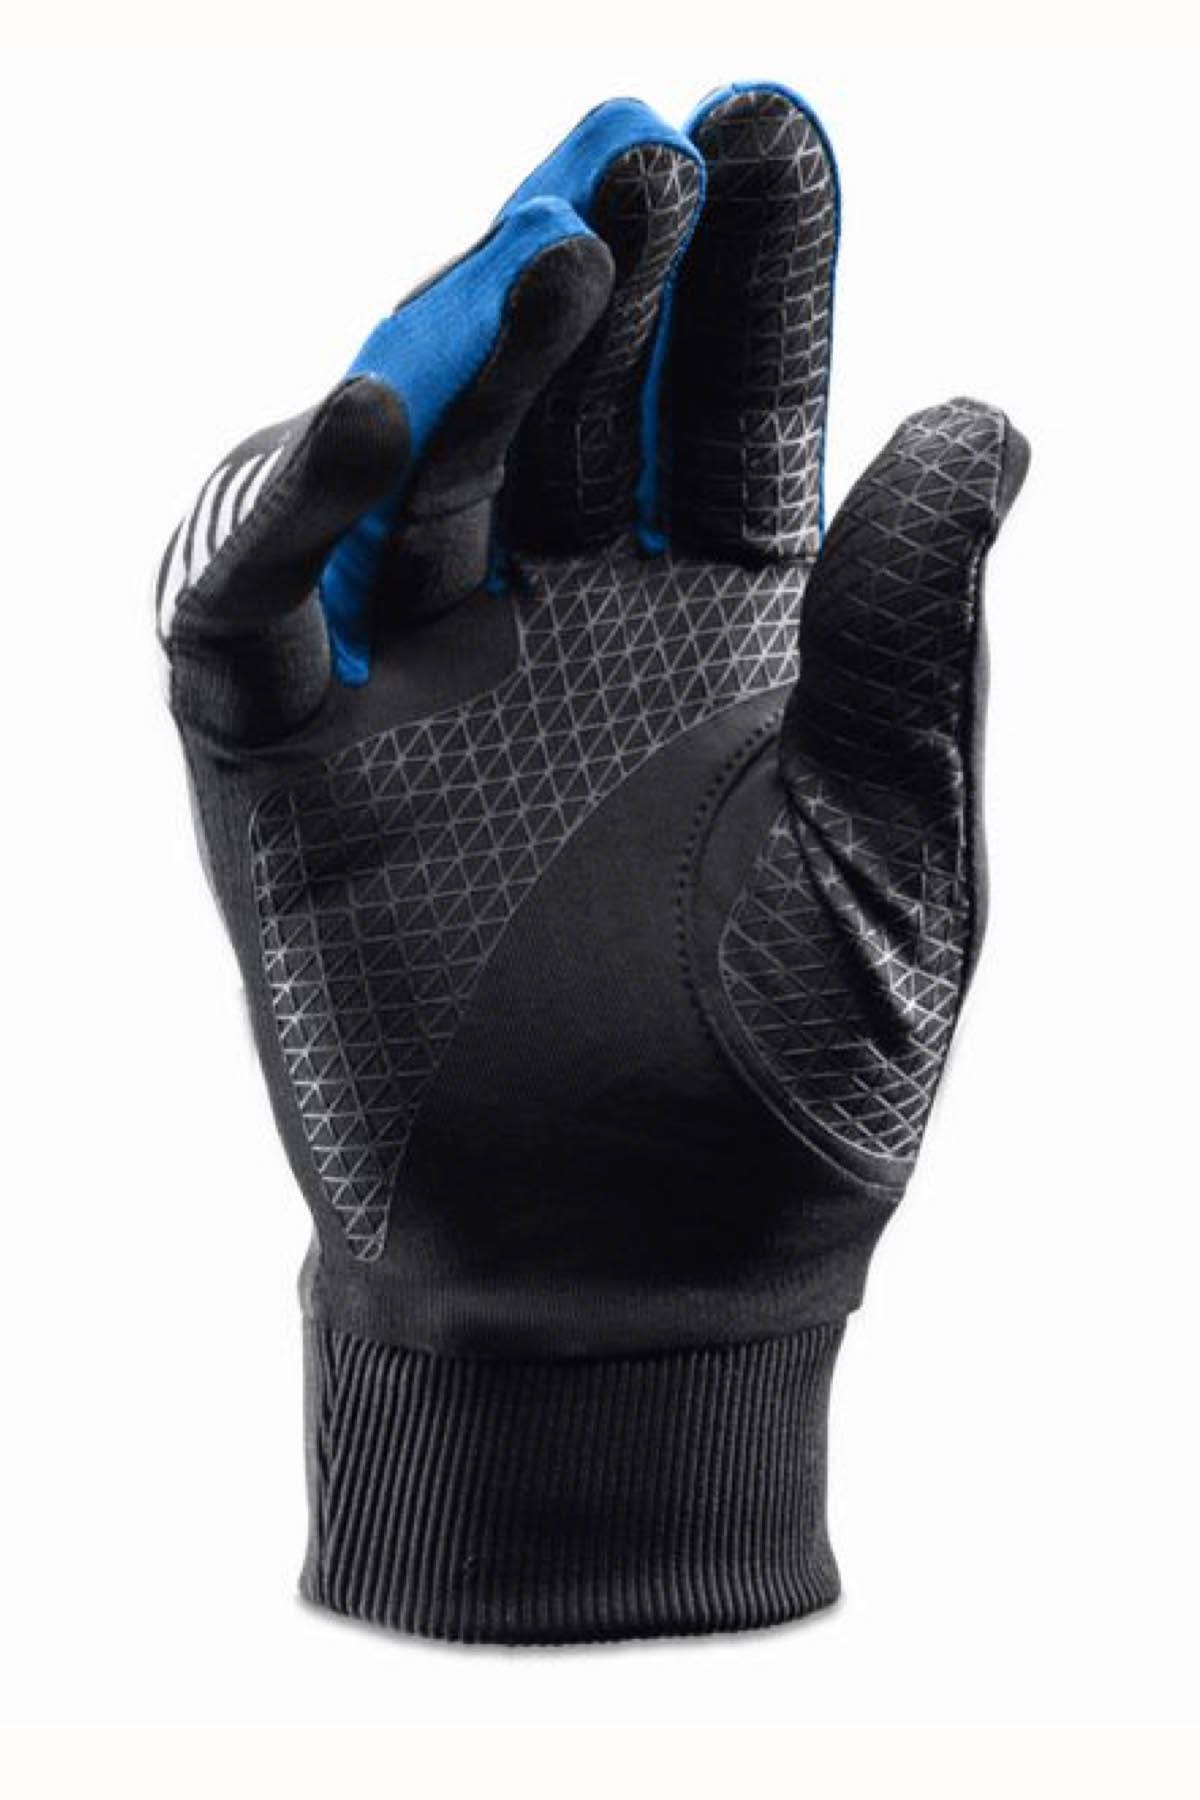 Under Armour Blue/Black ENGAGE ColdGear Infrared Touchscreen Running Gloves